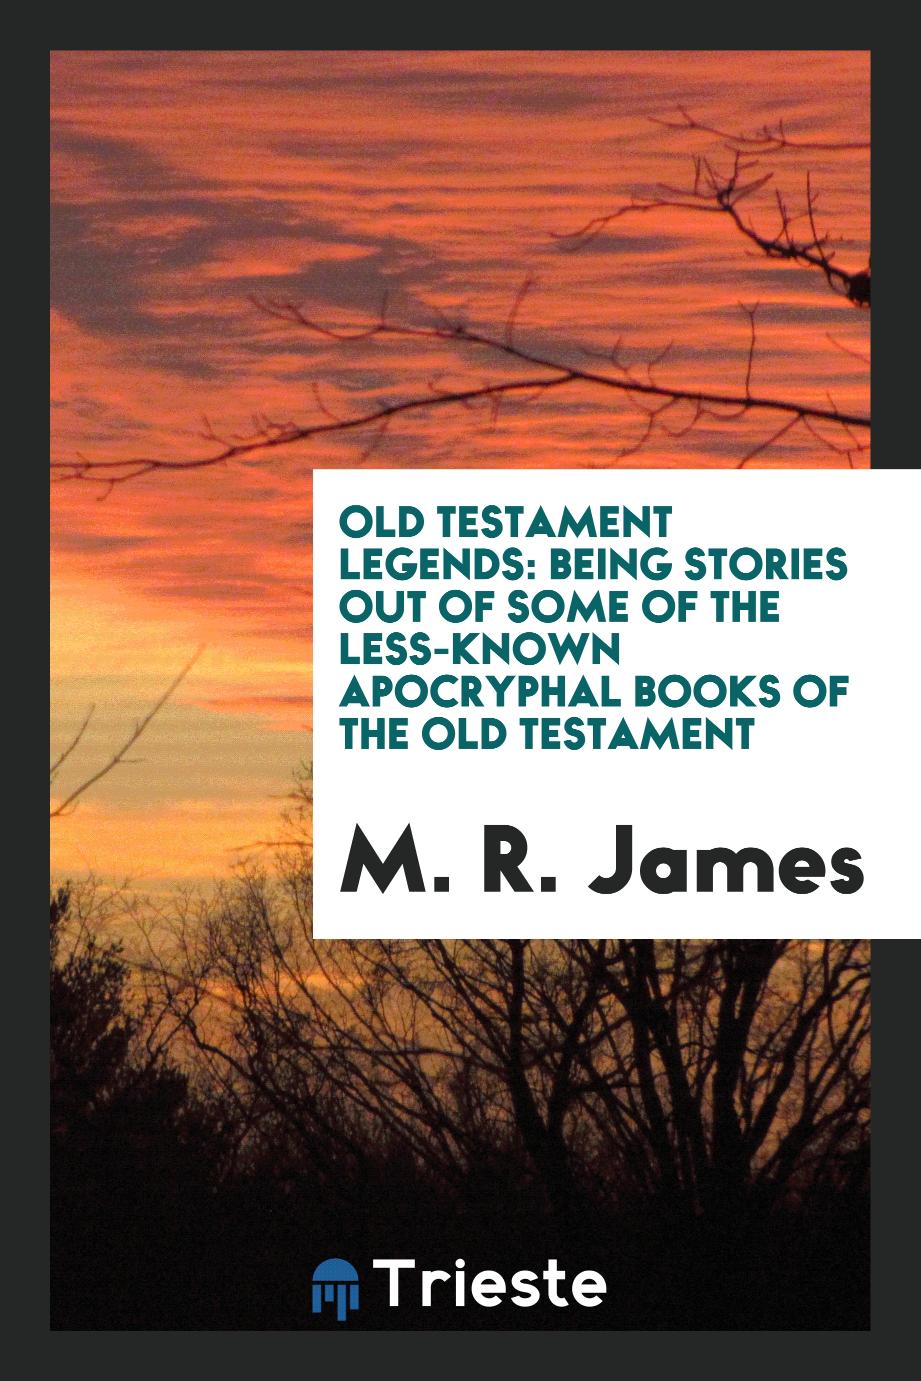 Old Testament legends: being stories out of some of the less-known apocryphal books of the Old Testament